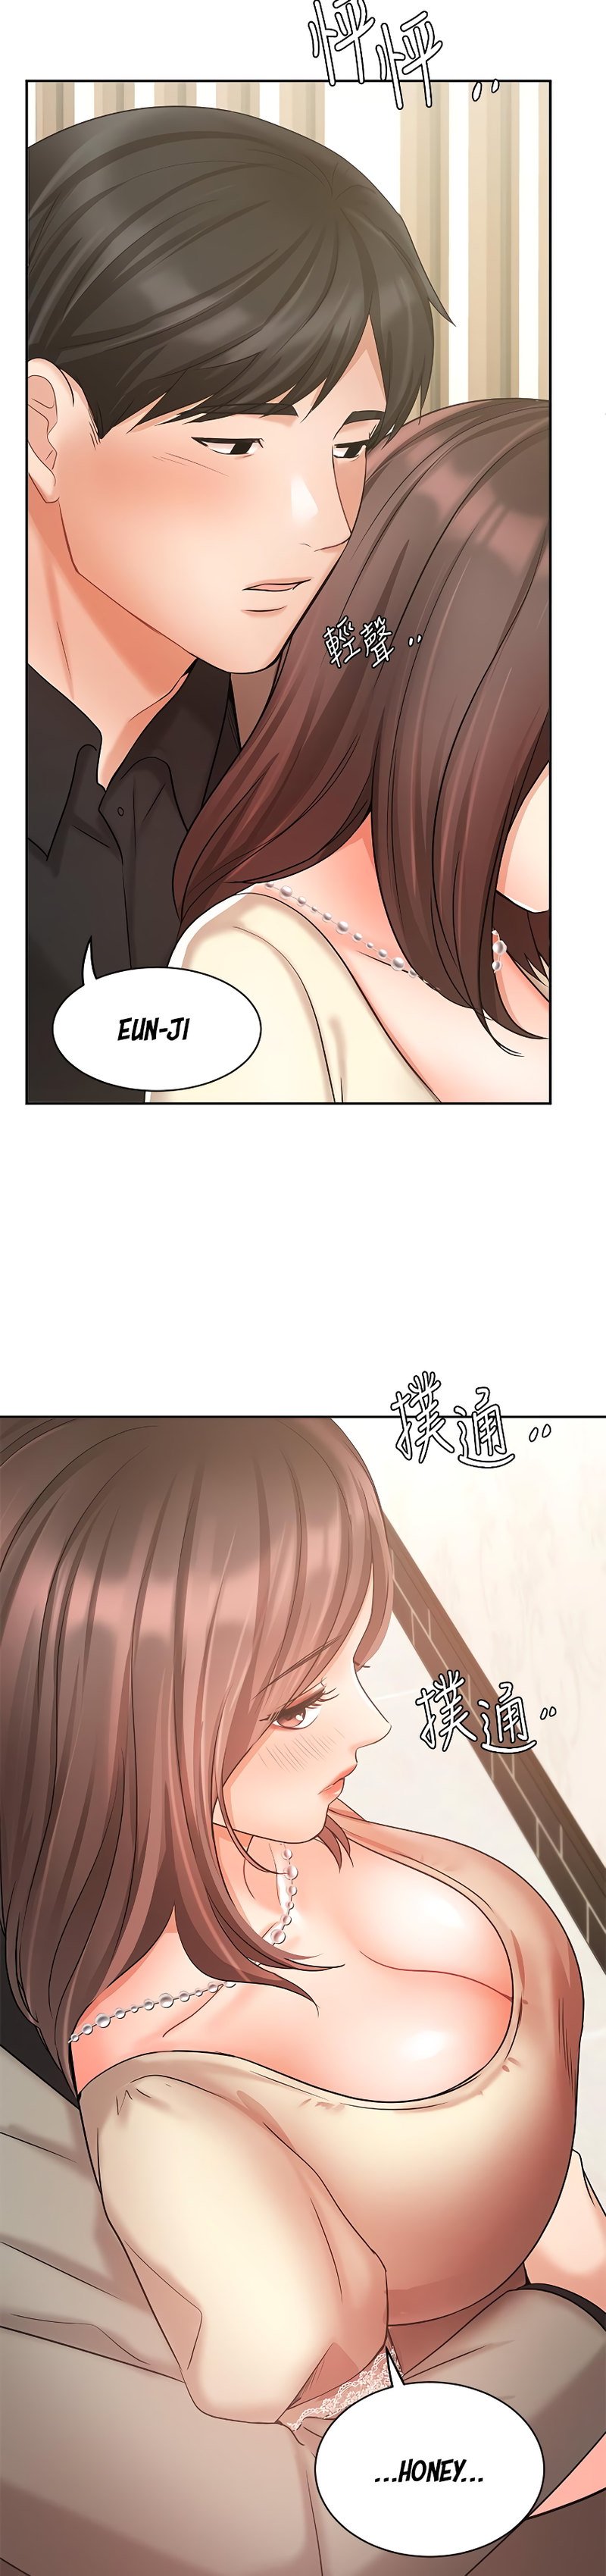 sold-out-girl-chap-35-3